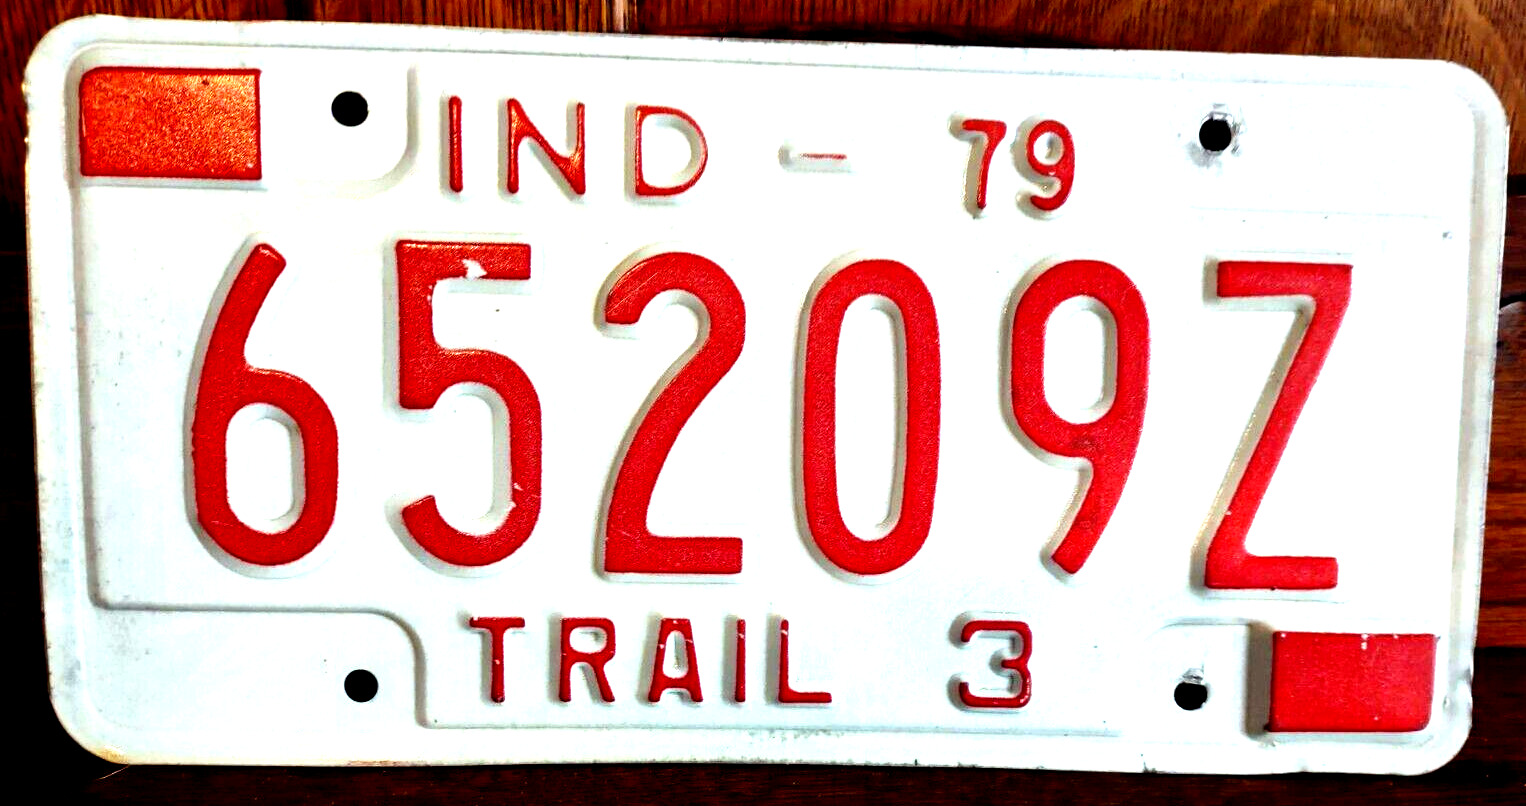 Indiana 1979 Red on White Metal Expired License Plate Tag 65209Z Trail 3 Trailer